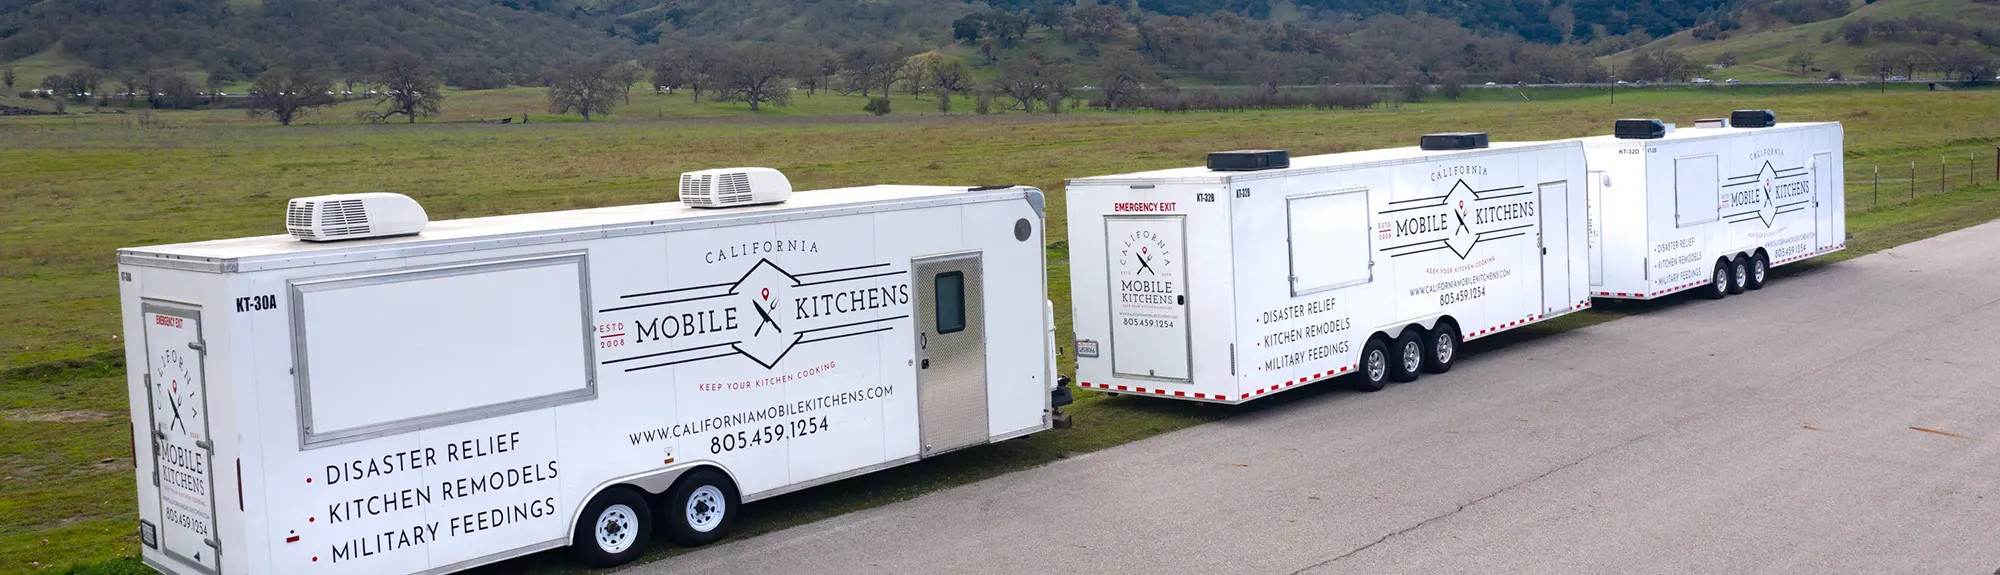 How a mobile kitchen can make Grandma’s recipe famous